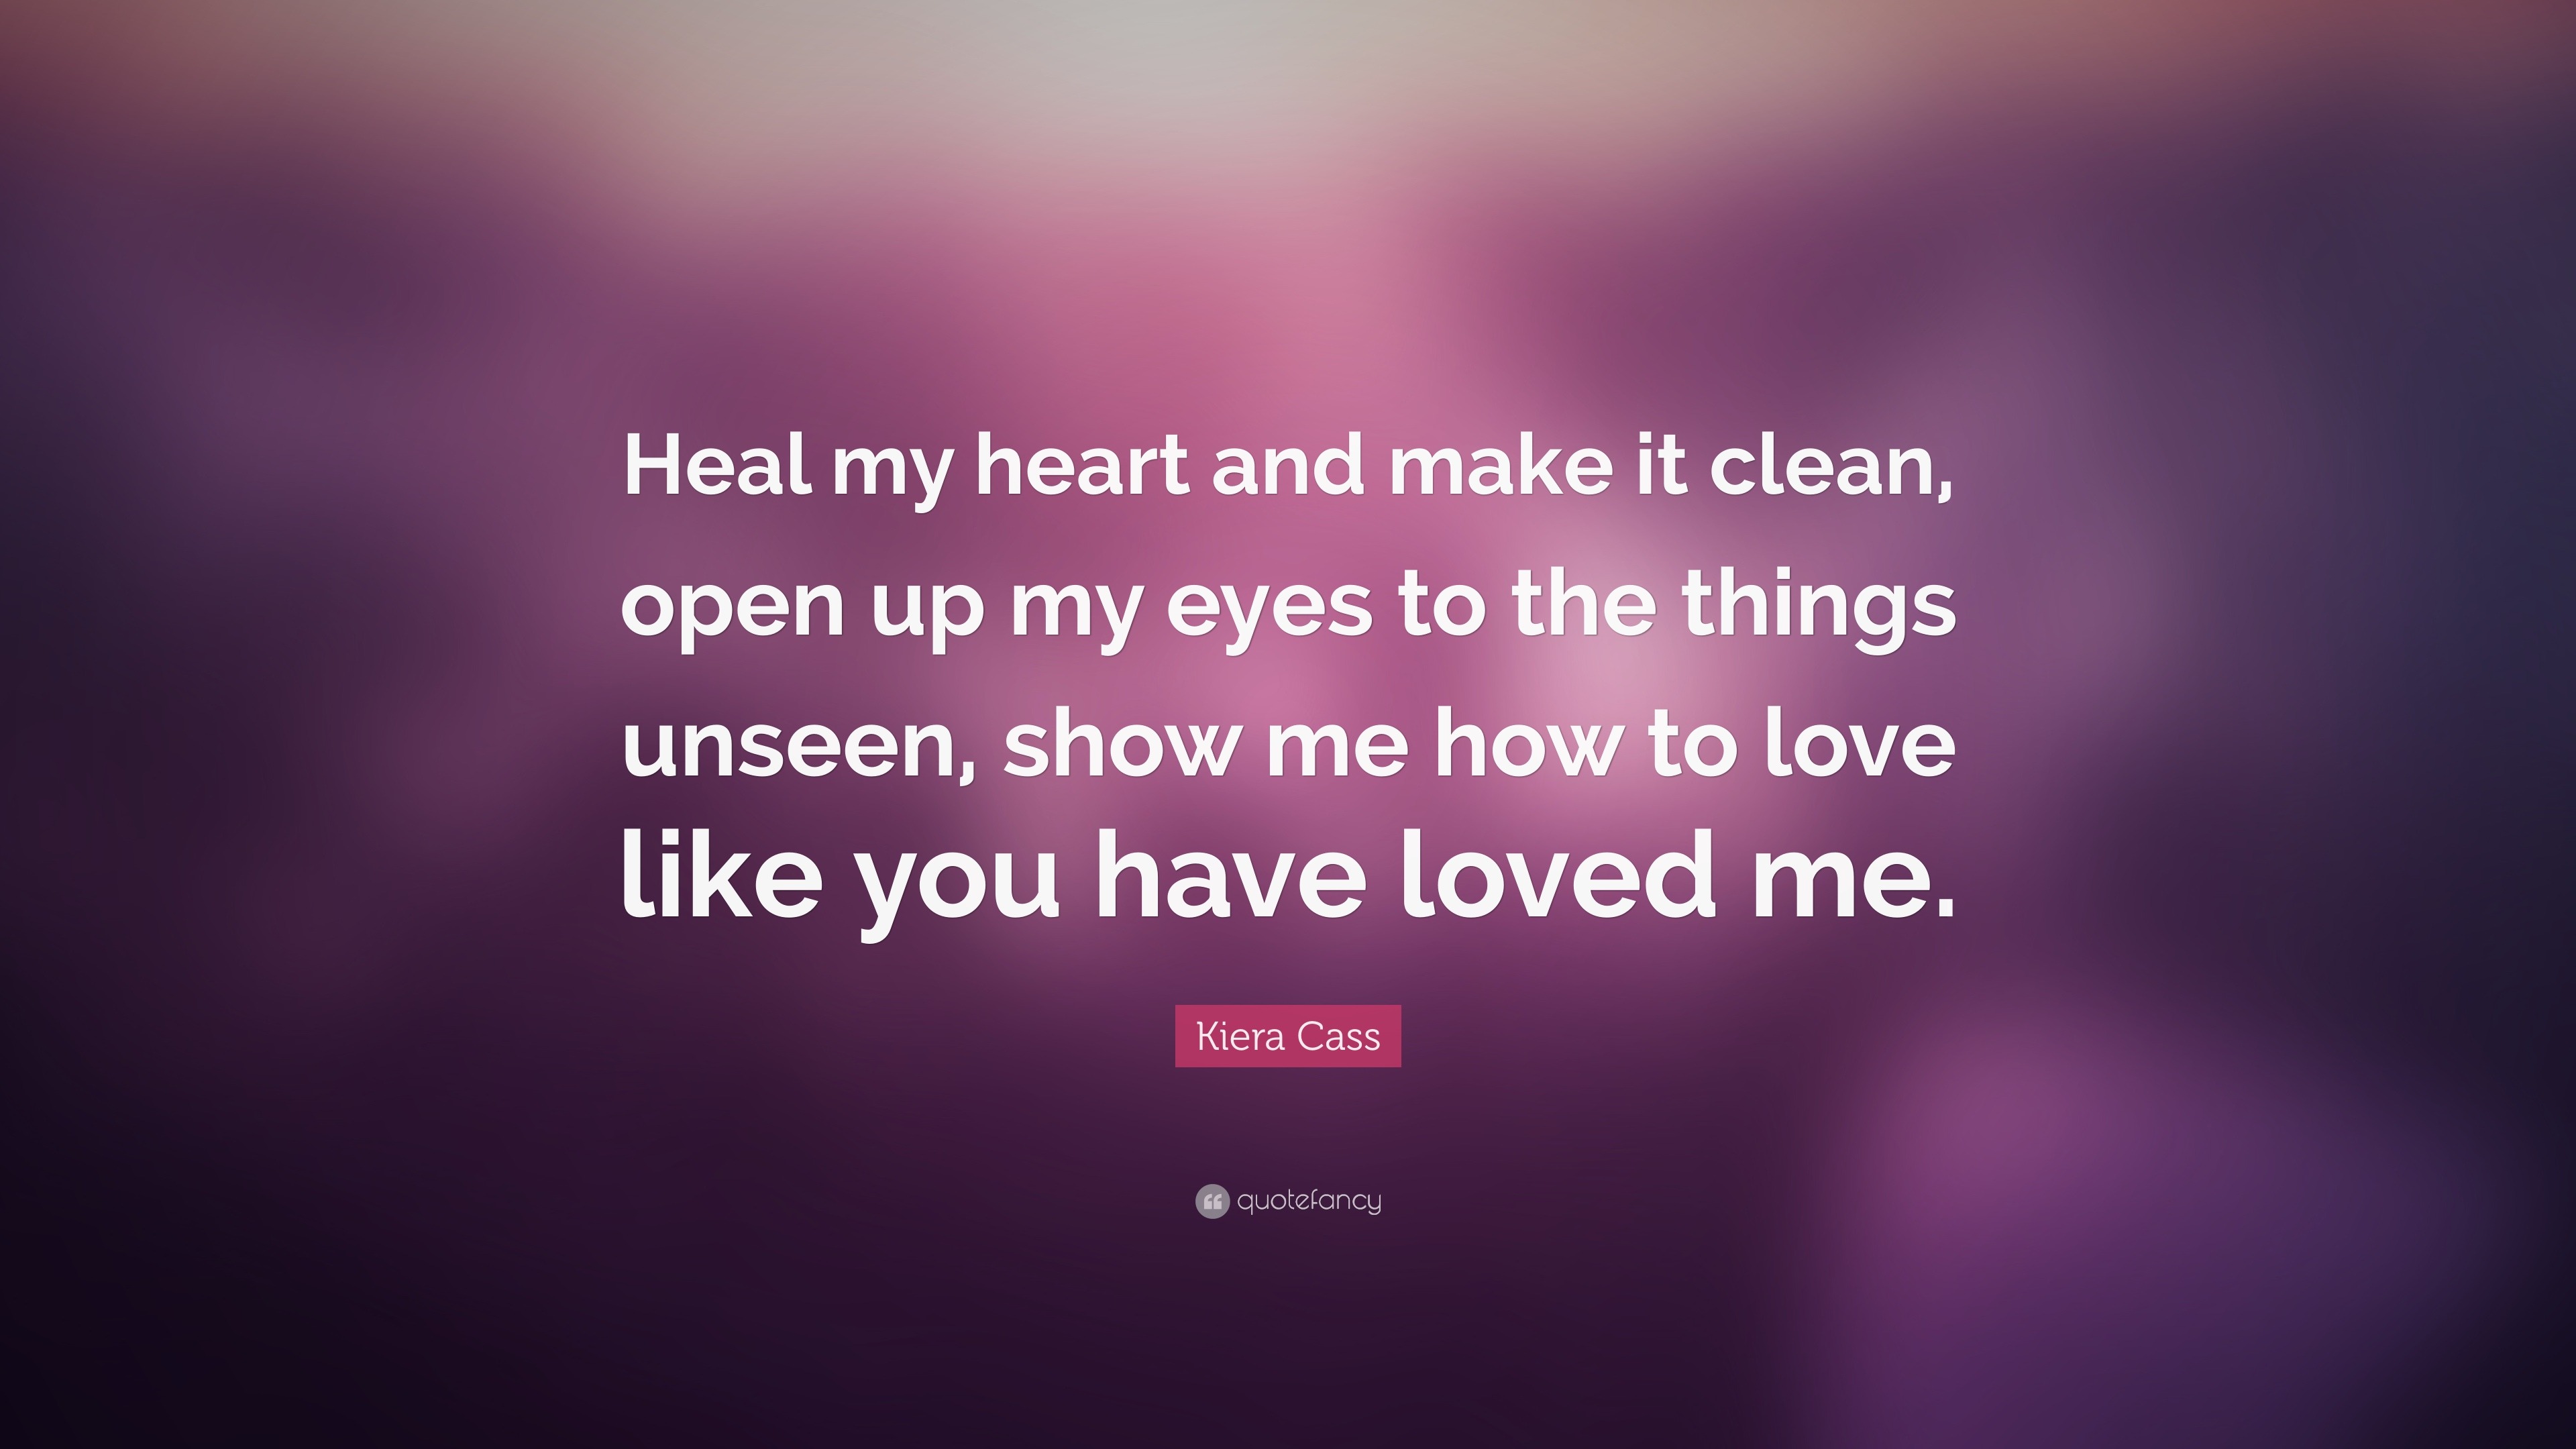 Kiera Cass Quote “Heal my heart and make it clean open up my